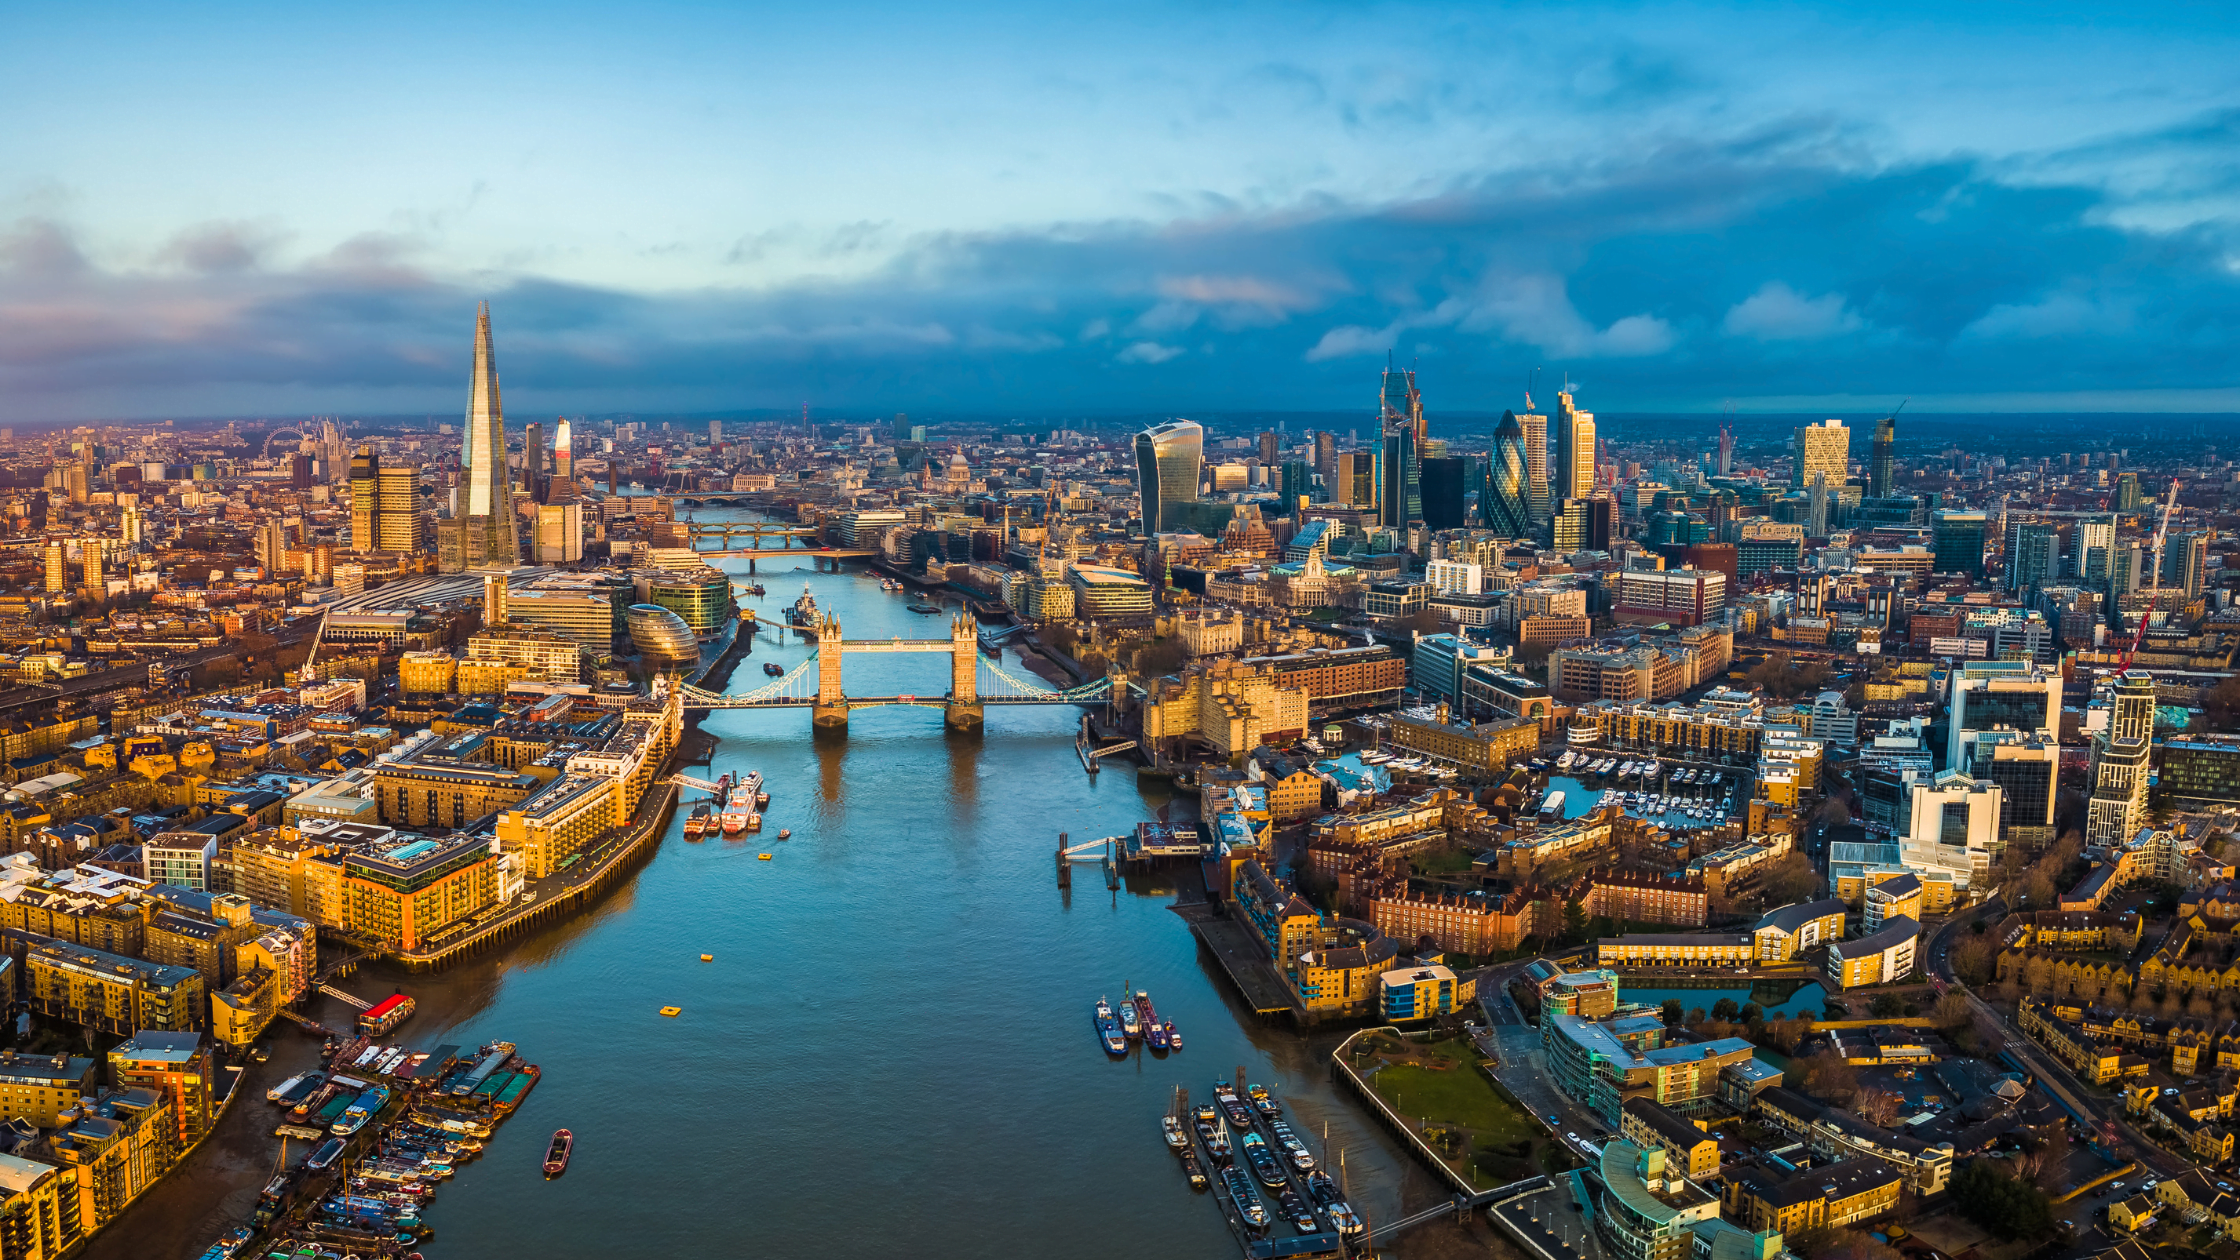 Sustainable waste in cities: View over River Thames showing London landscape